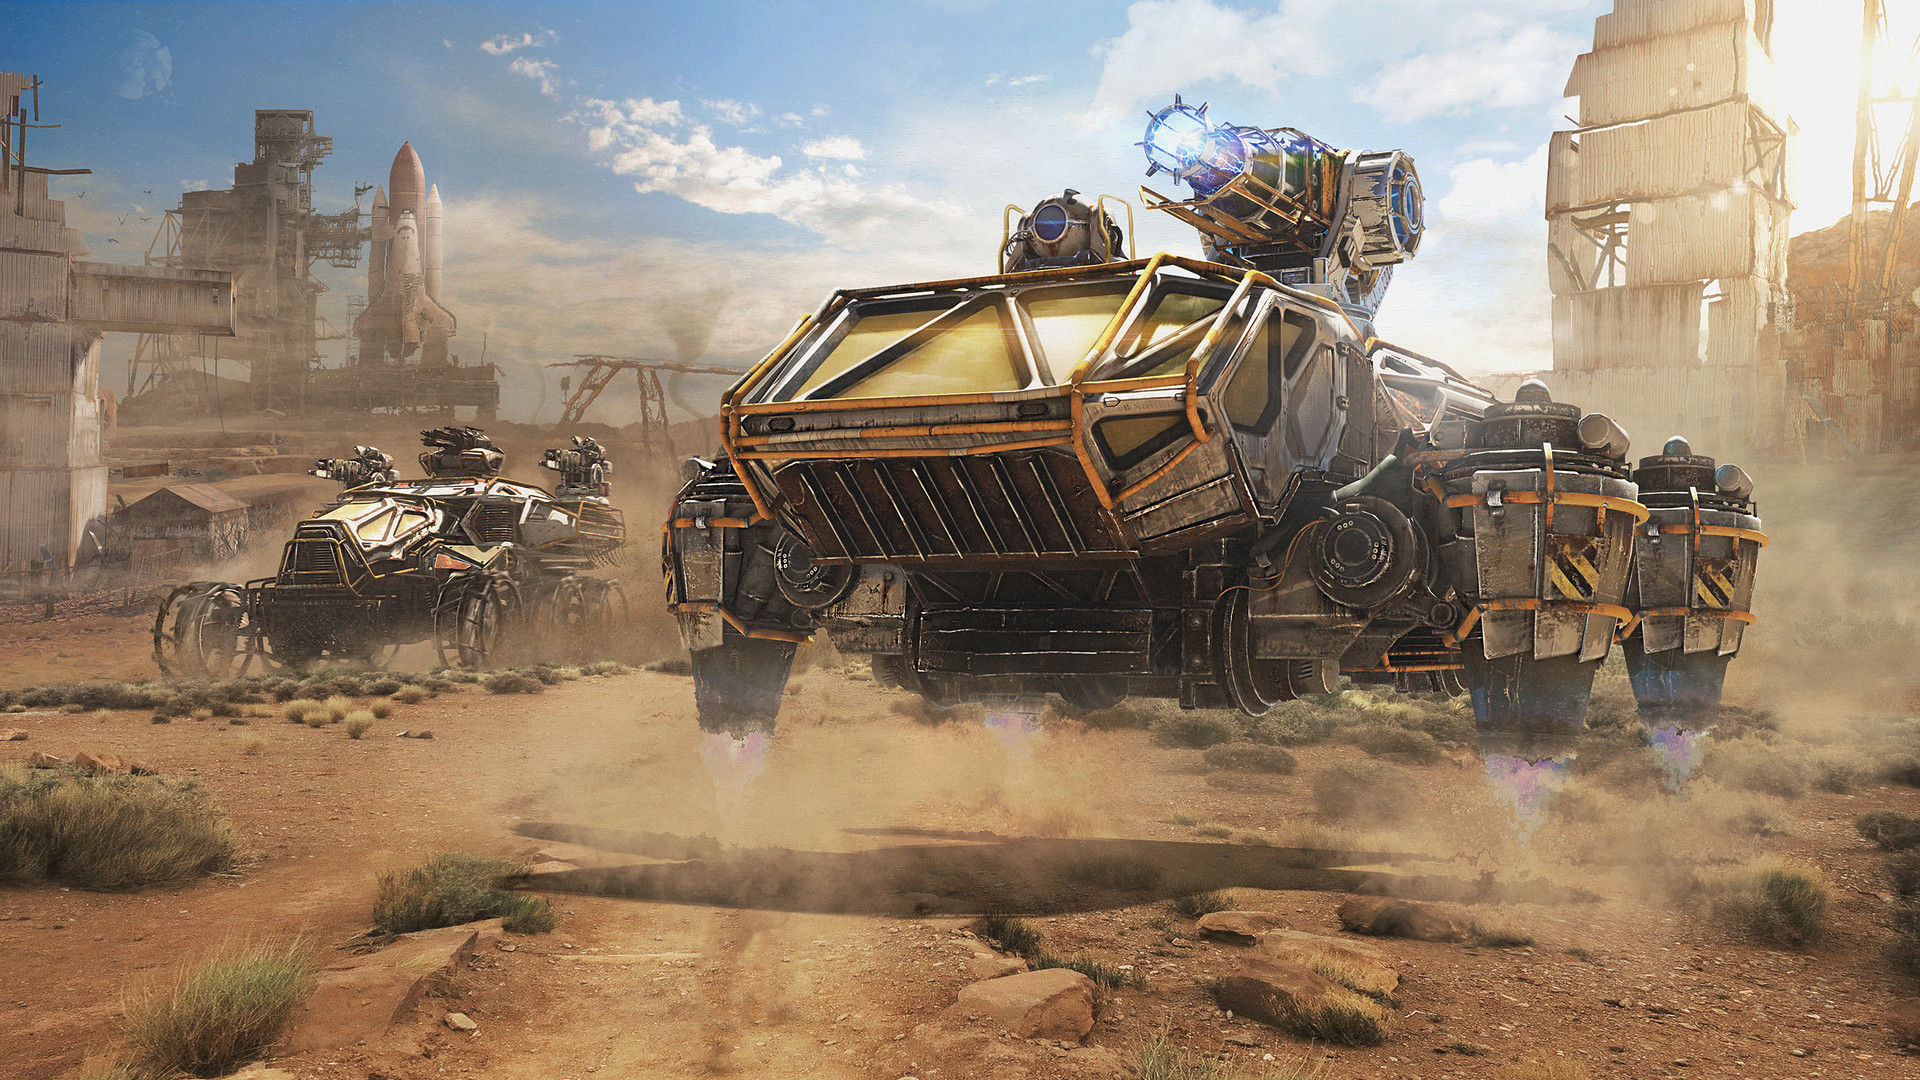 video game, crossout, crossout (video game), desert, post apocalyptic, space shuttle, vehicle